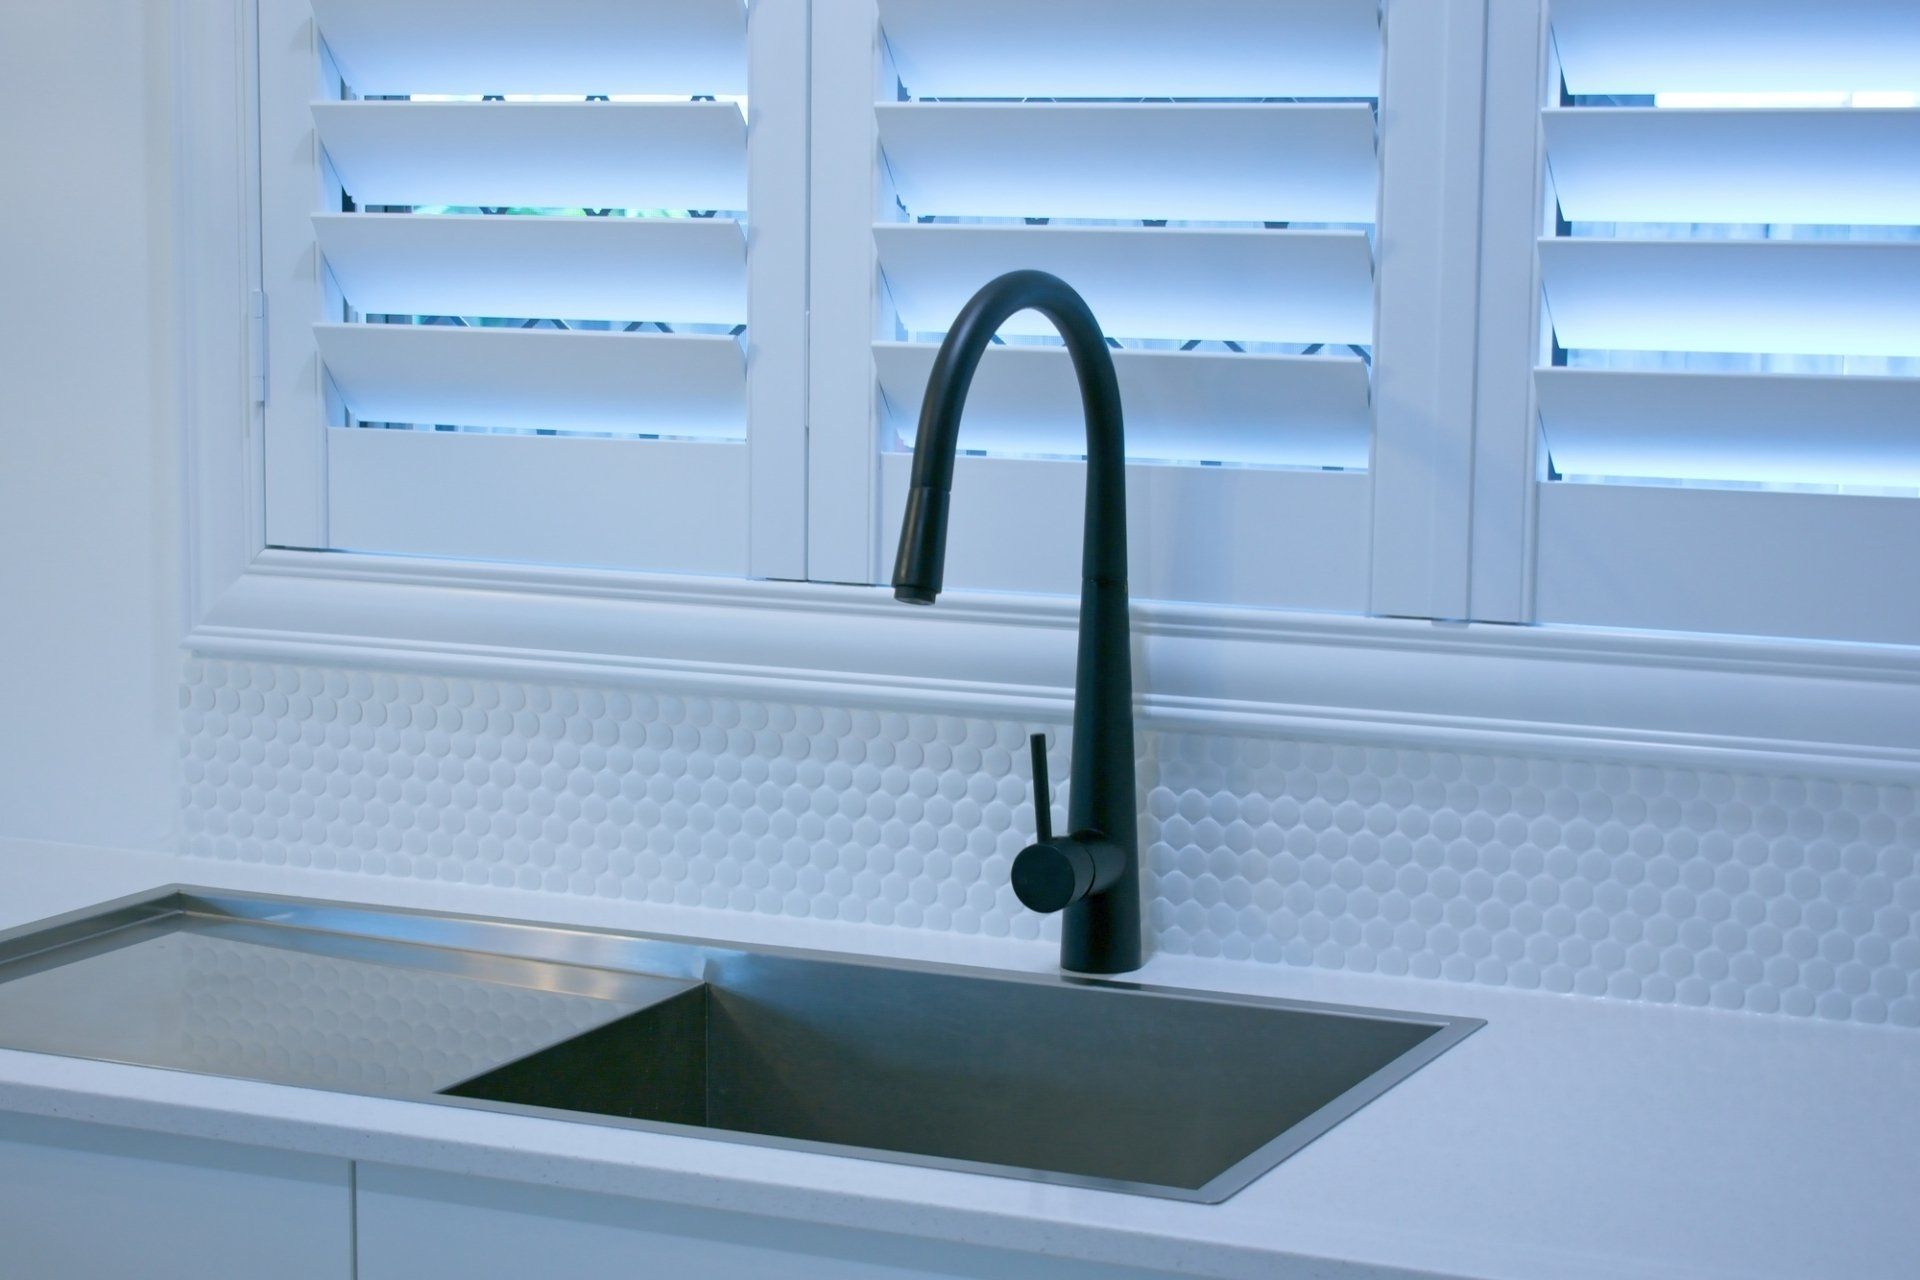 White plantation shutters, opened over kitchen sink and bench, contrasted with black mixer tap.